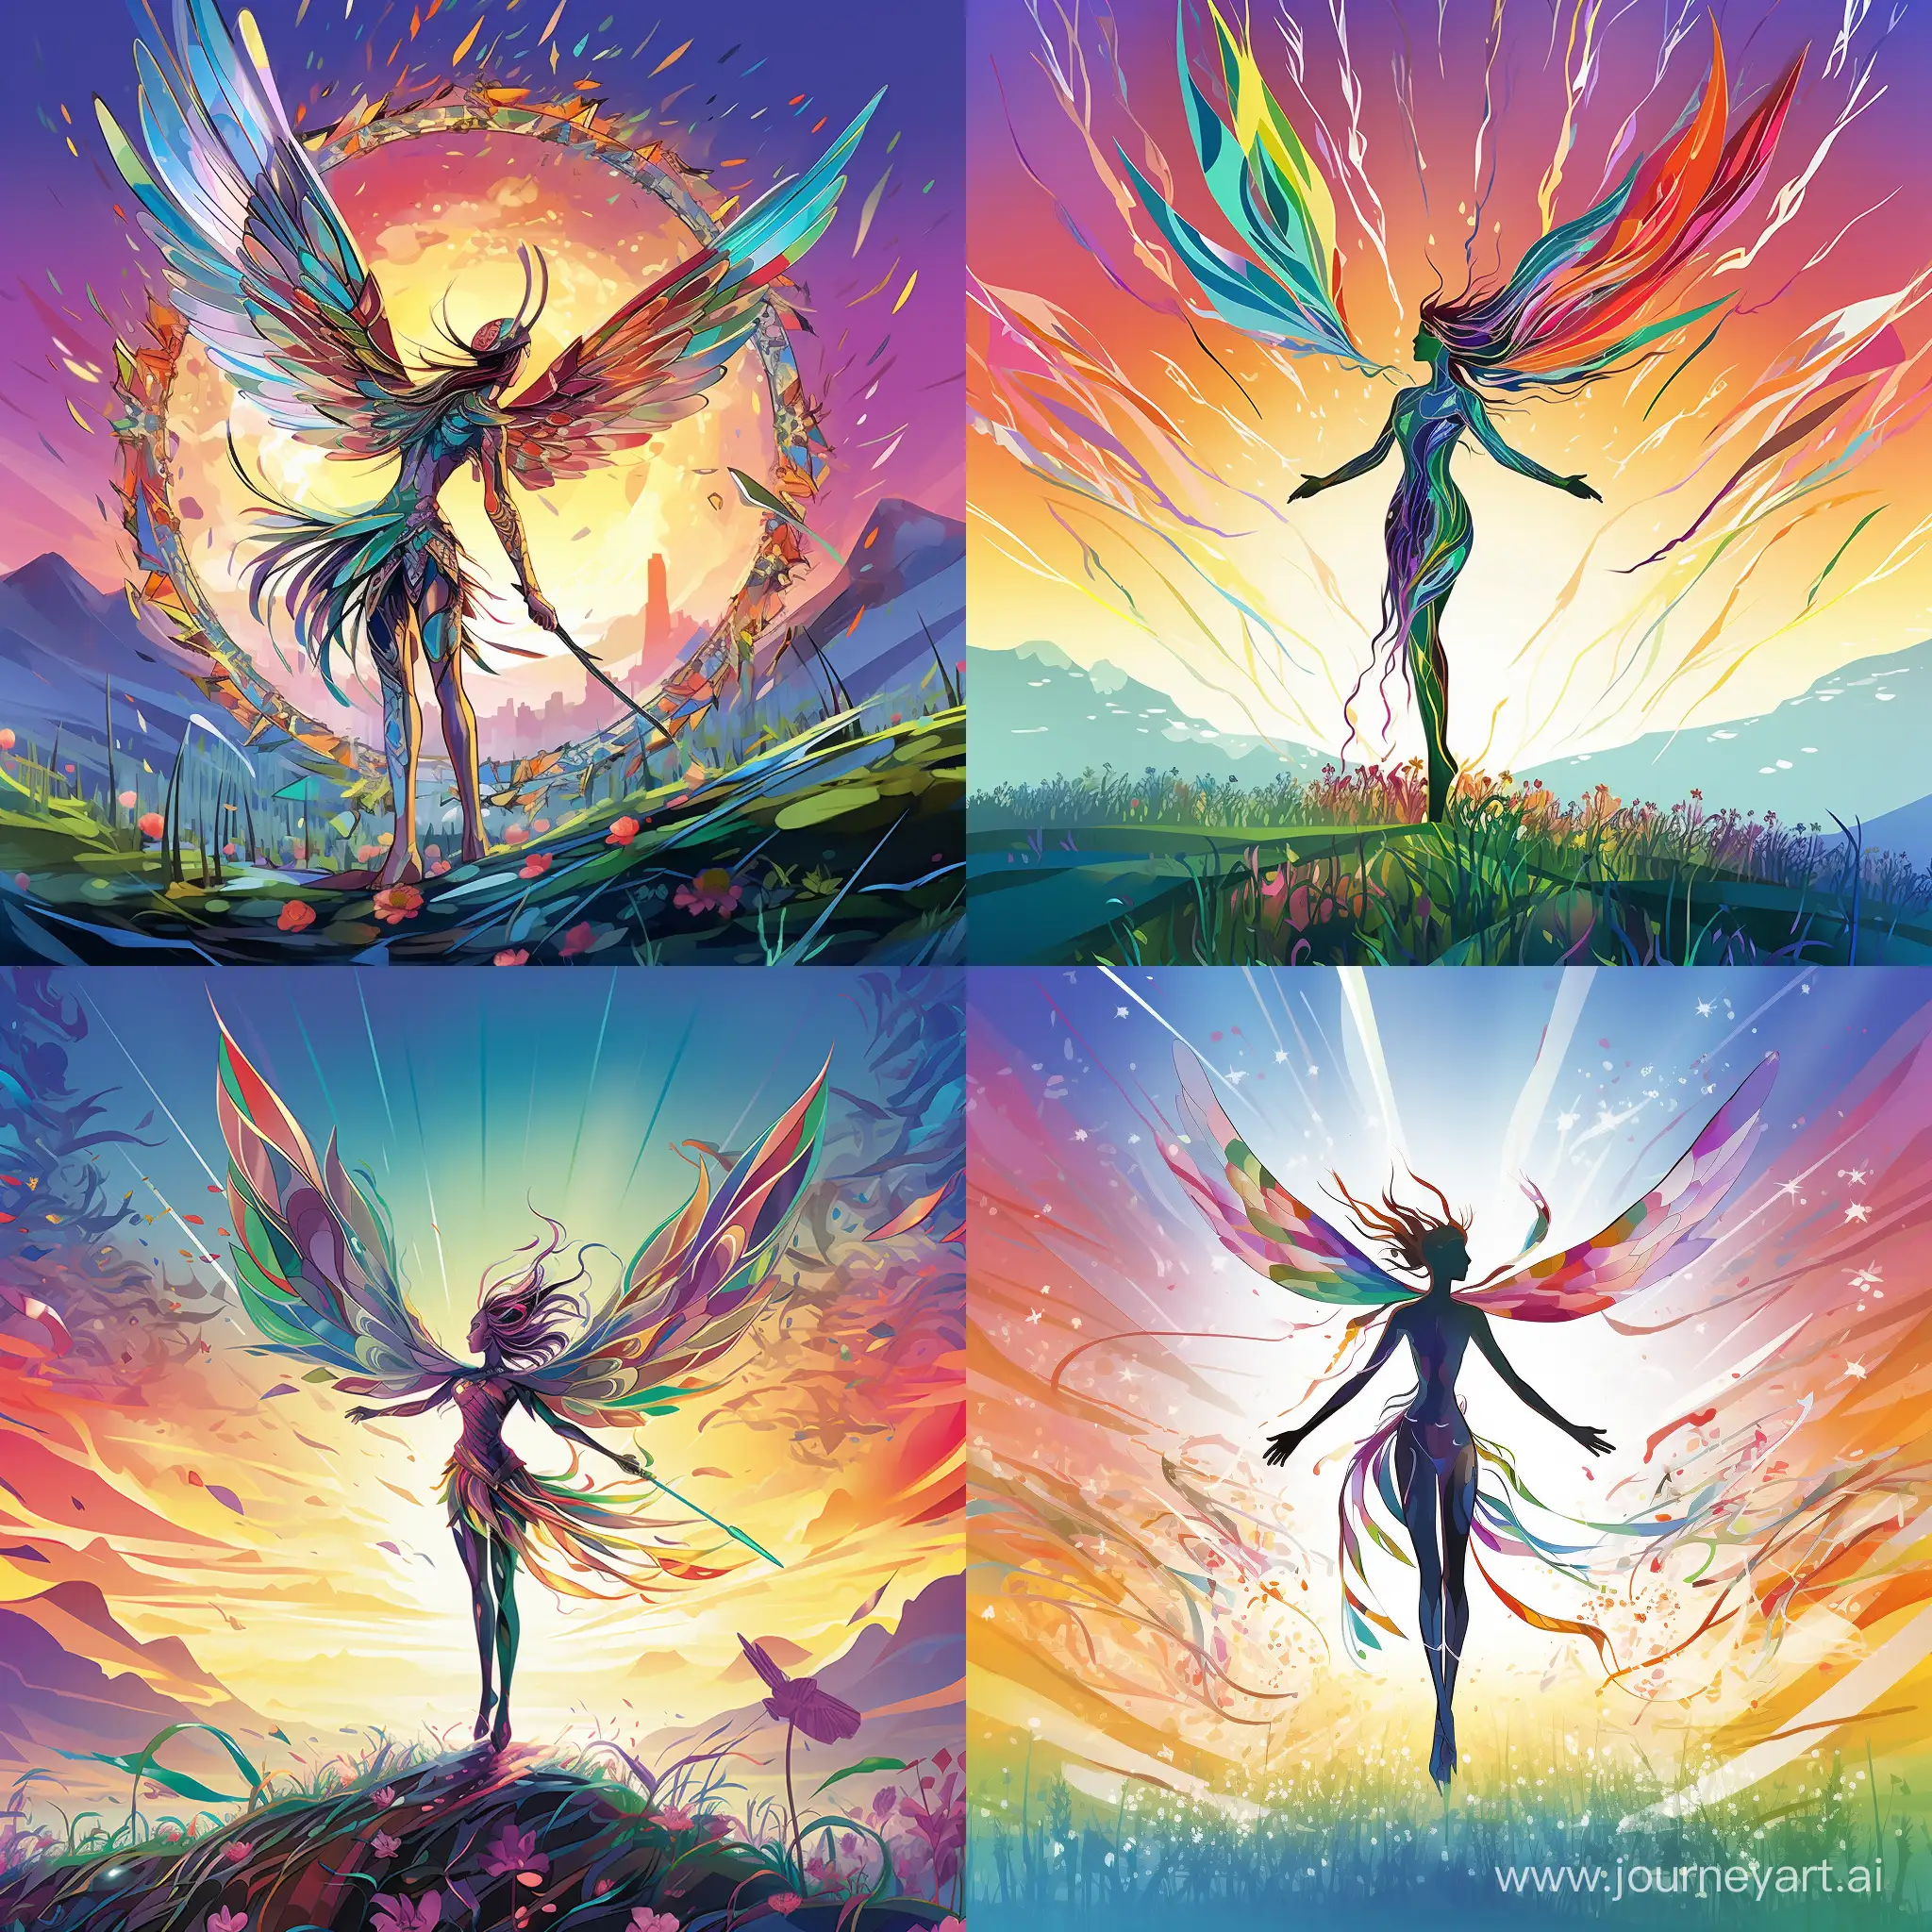 color, Simple image, simple line, with hummingbird, Full body, Full figure, flying pose, blades, kinetic waves that look like cuts, with power of wings as sharp as blades, wings of blades, cutting effect, small compared to the whole image , colorful, meadow background, fantasy character, fantasy style, d